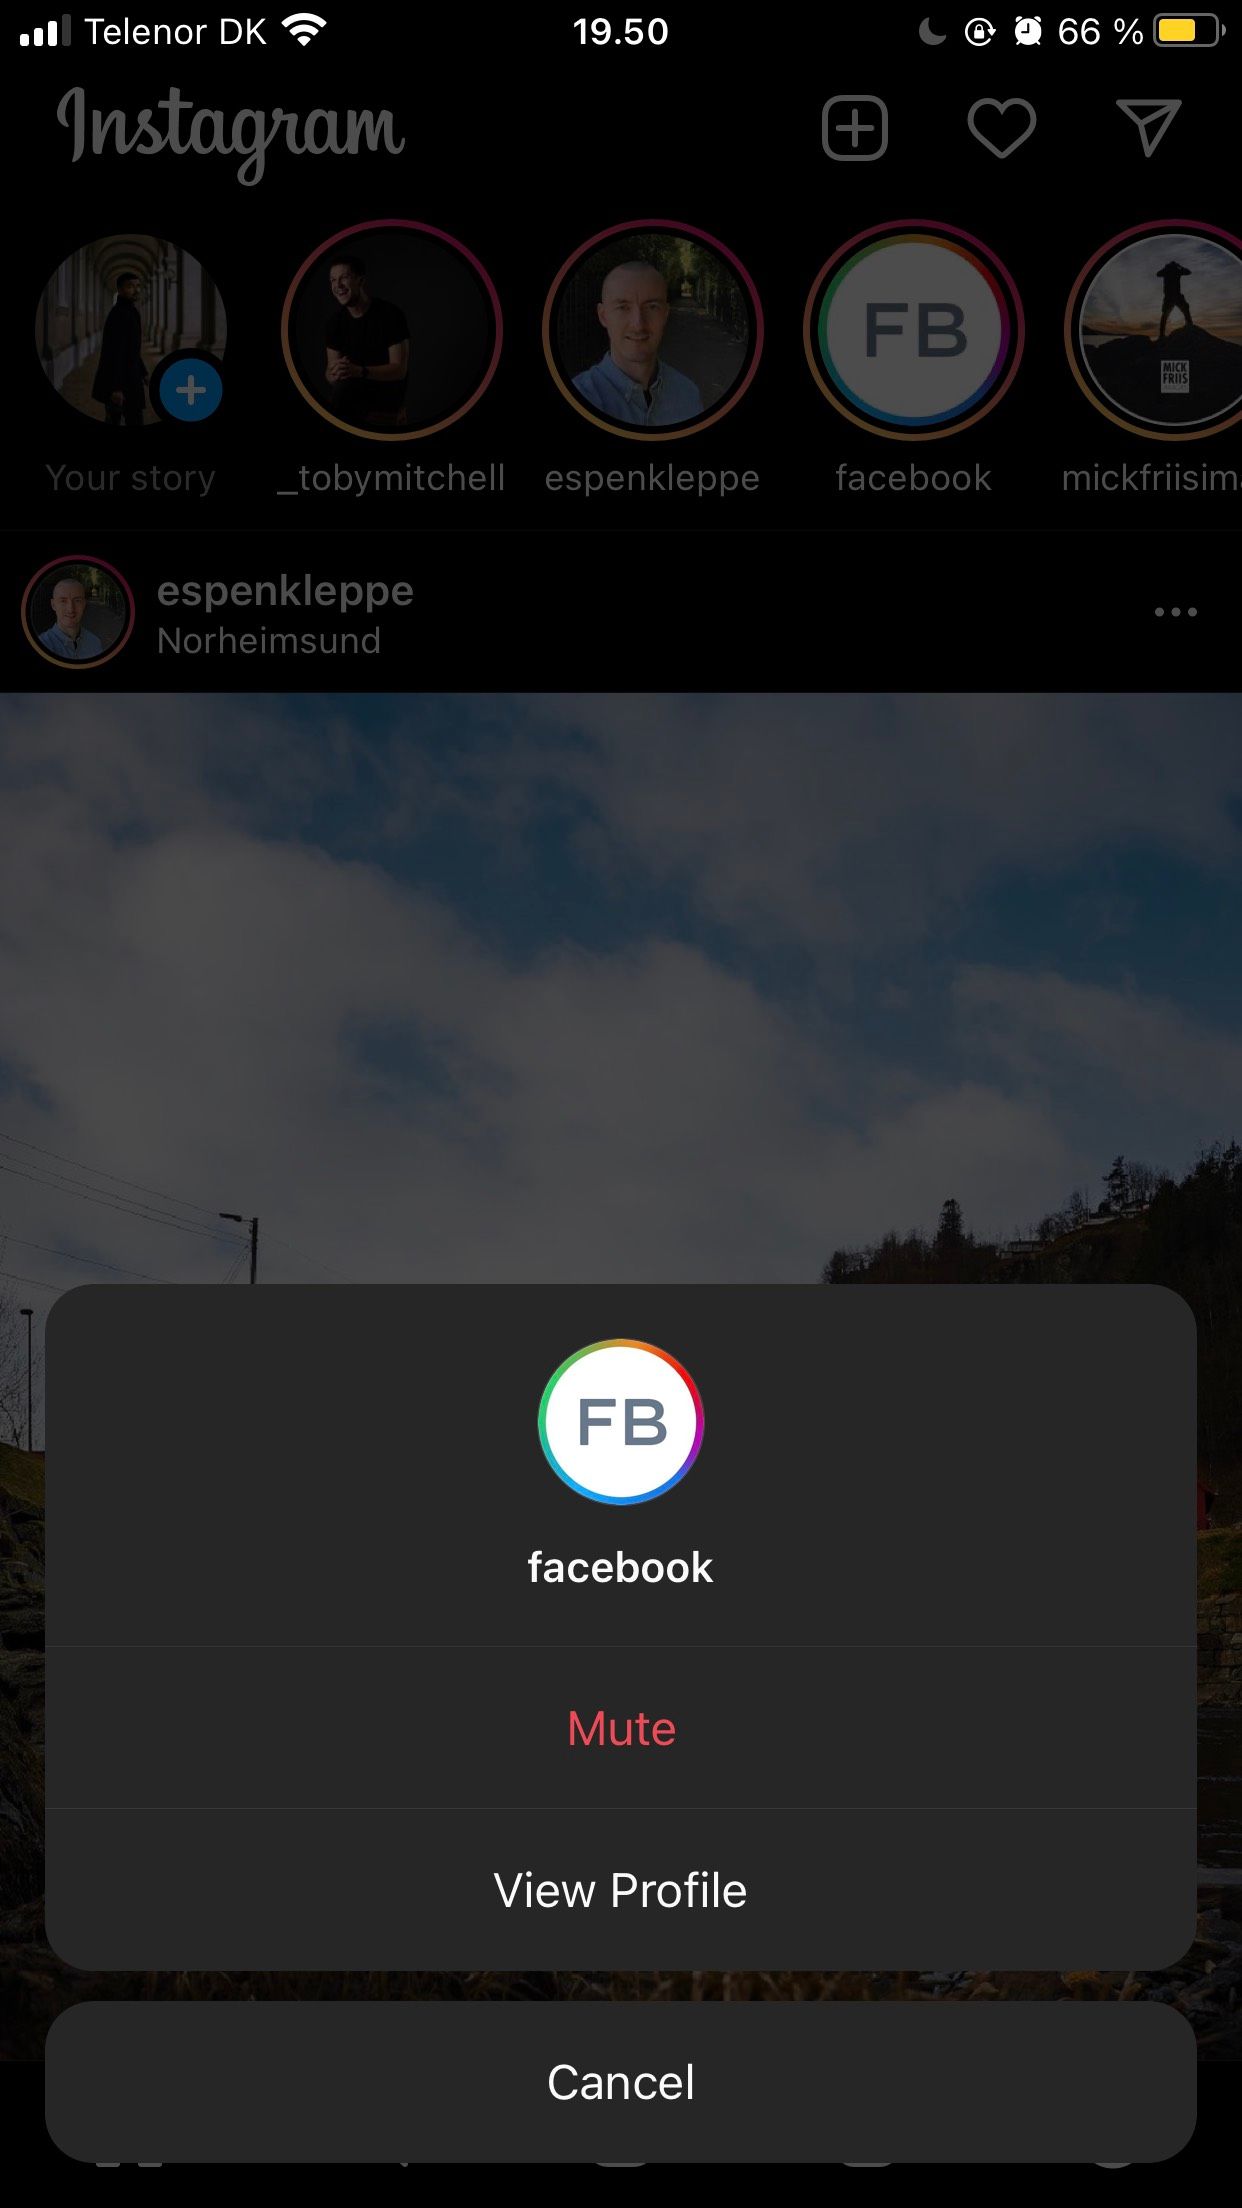 mute option for ig account